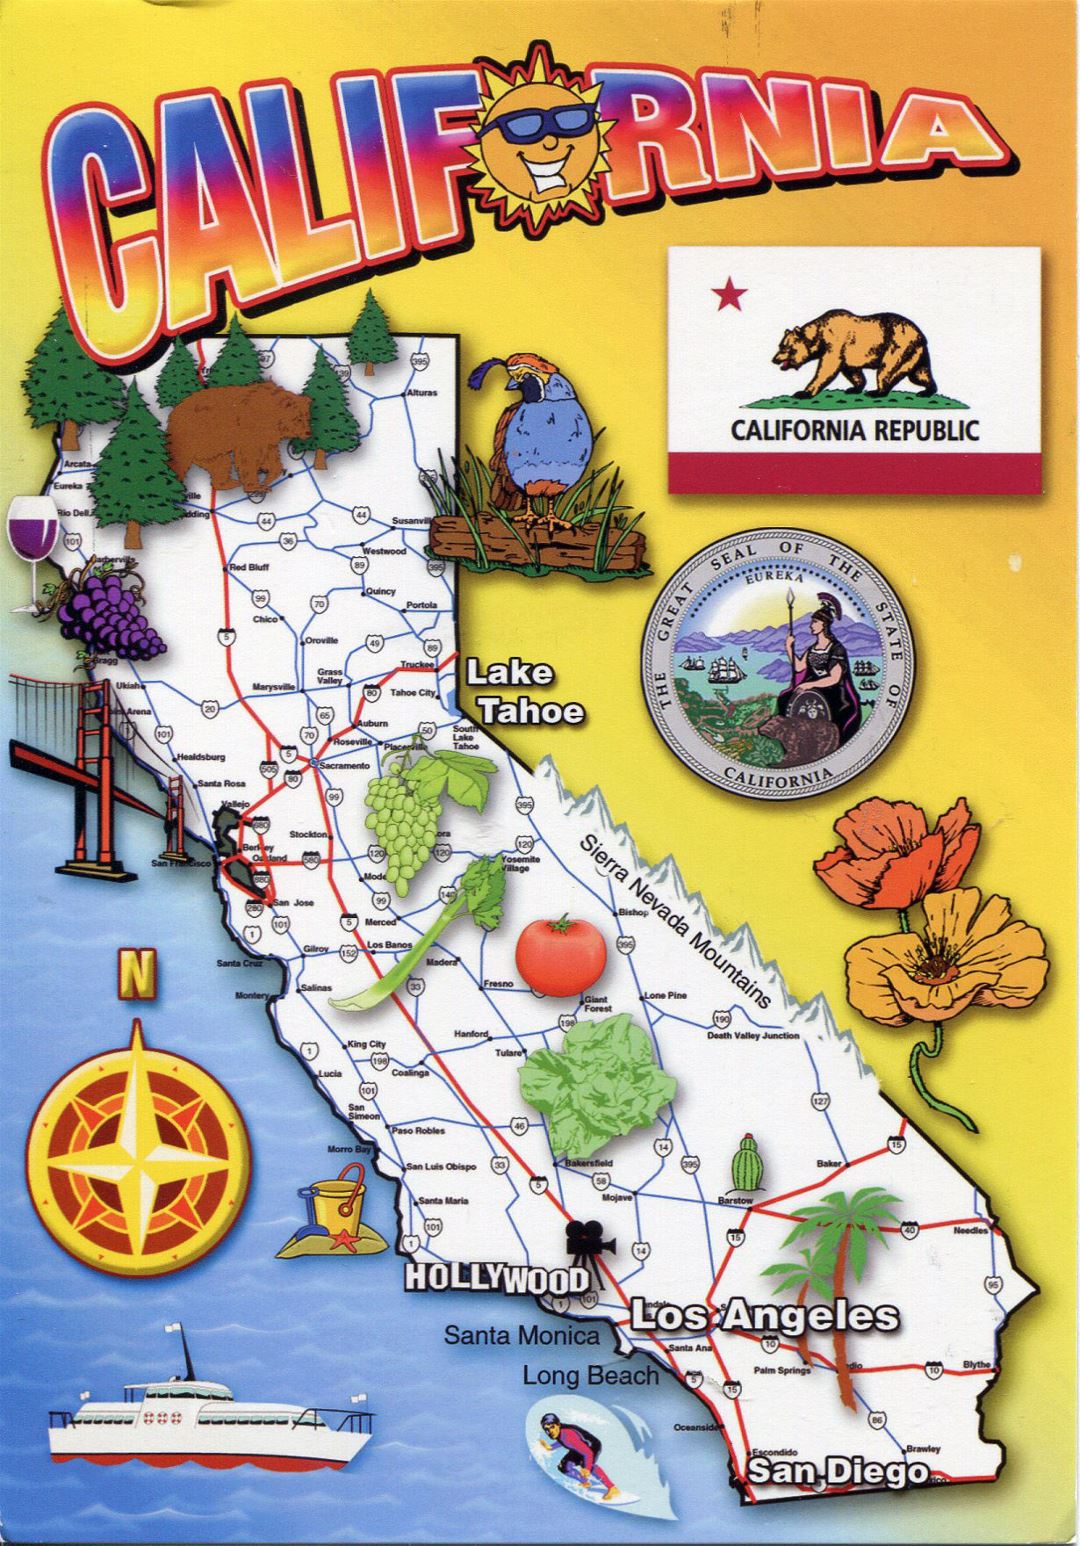 Detailed tourist map of California state